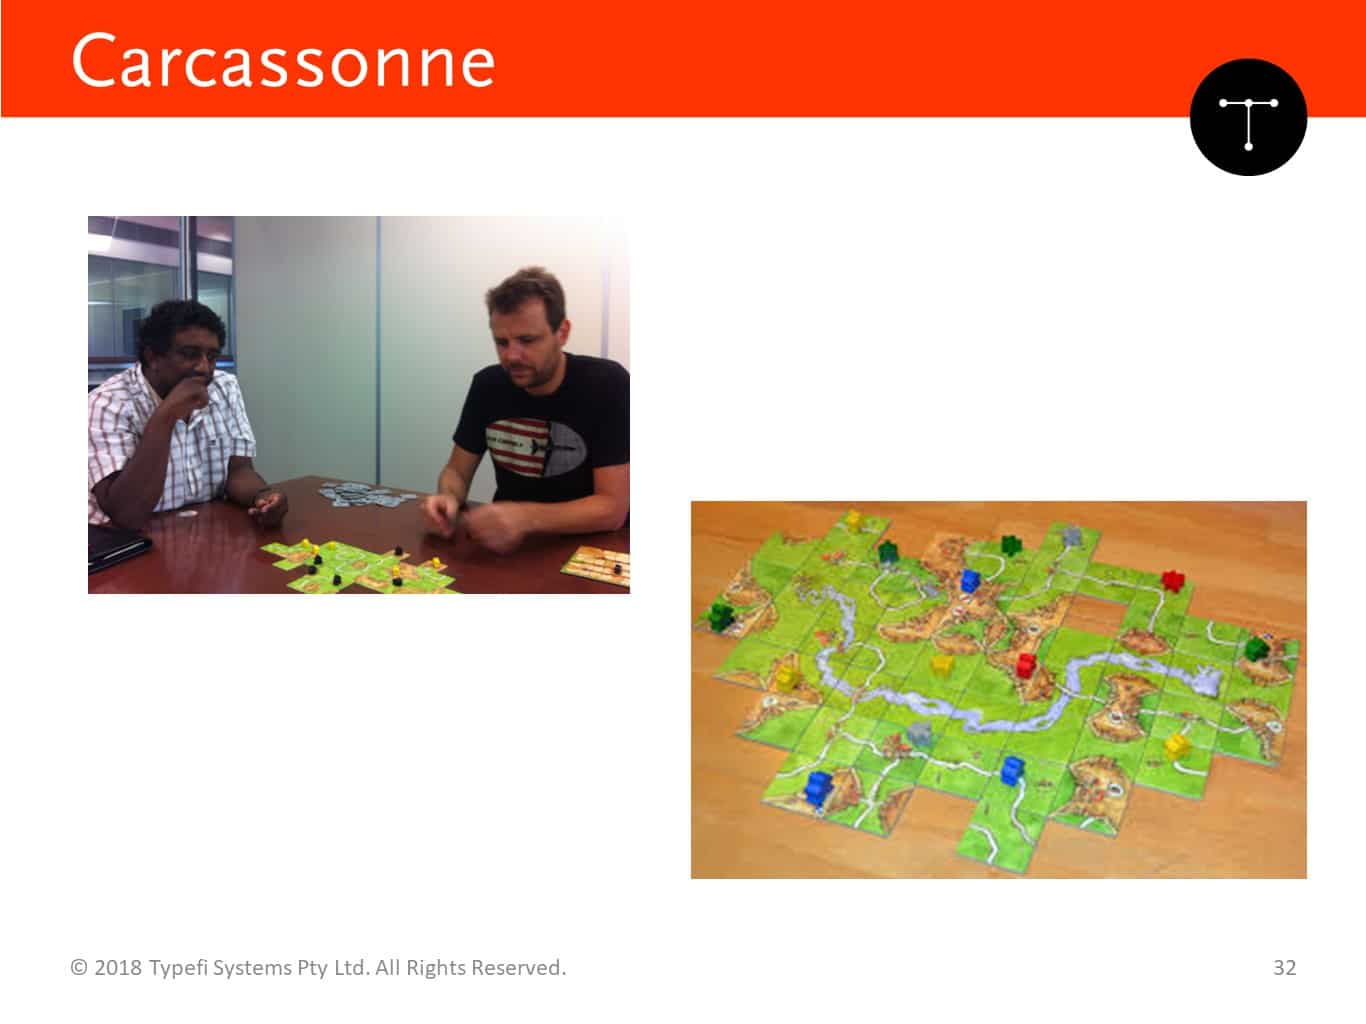 A slide with two photos - one shows Chandi Perera and Ben Hauser playing Carcassonne, and the other is a photo of Carcassonne tiles laid out during a game.